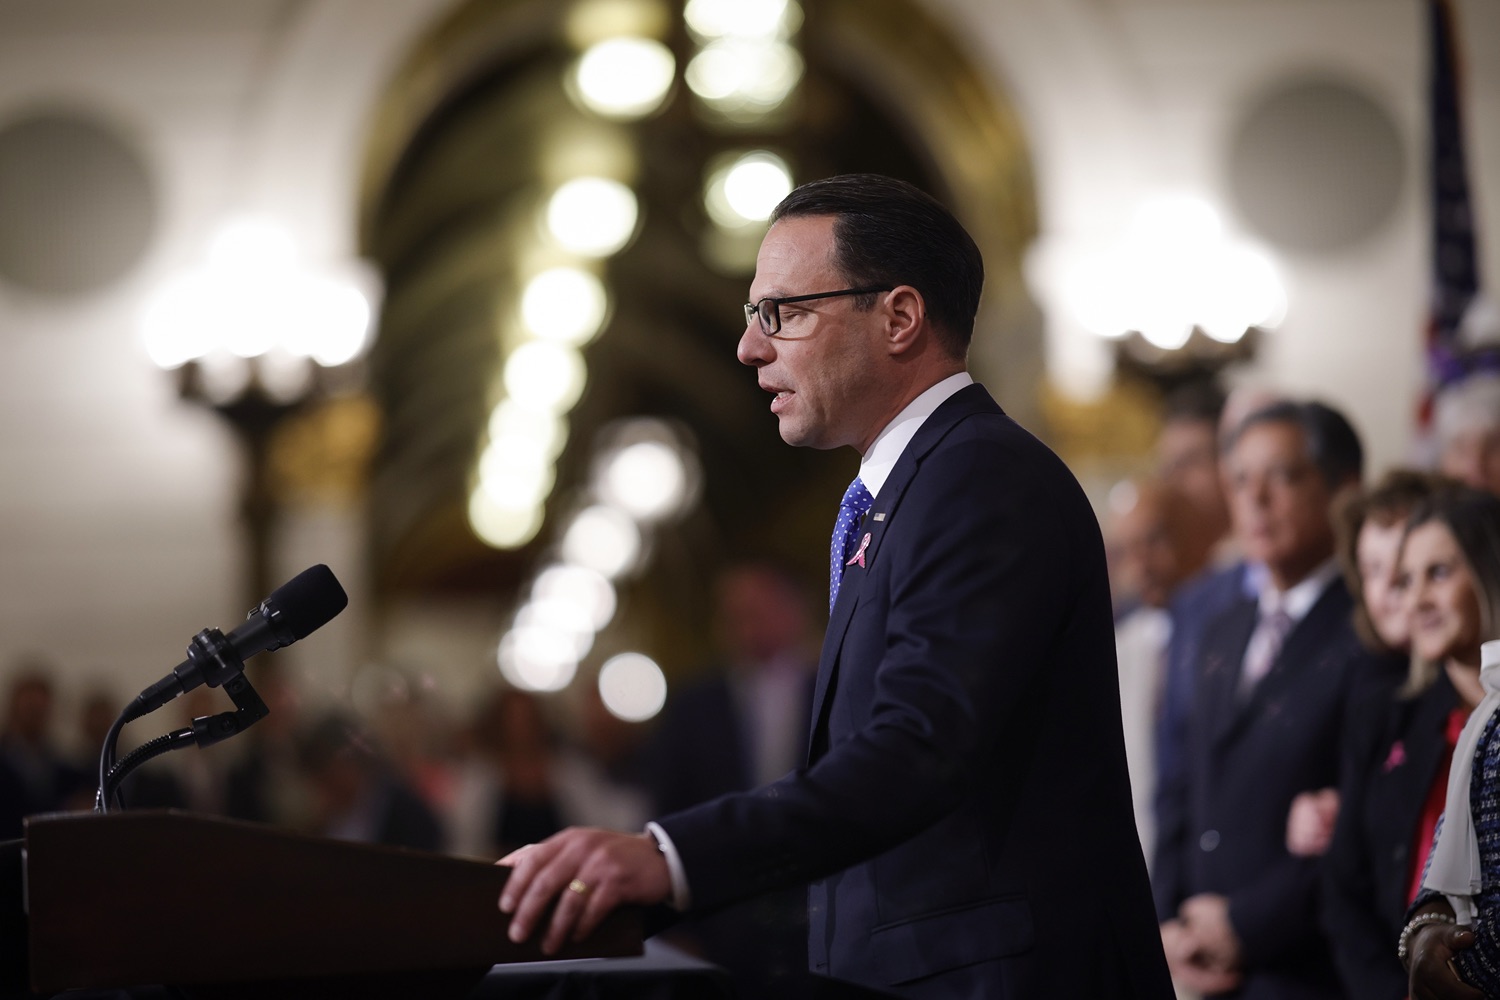 Governor Josh Shapiro signed the first bill of his Administration - Act 1 of 2023, a first-of-its-kind law in the nation that will require insurers to cover preventive breast and ovarian cancer screenings for high-risk women at no cost. MAY 01, 2023 - HARRISBURG, PA<br><a href="https://filesource.amperwave.net/commonwealthofpa/photo/23041_gov_sb8_dz_012.JPG" target="_blank">⇣ Download Photo</a>